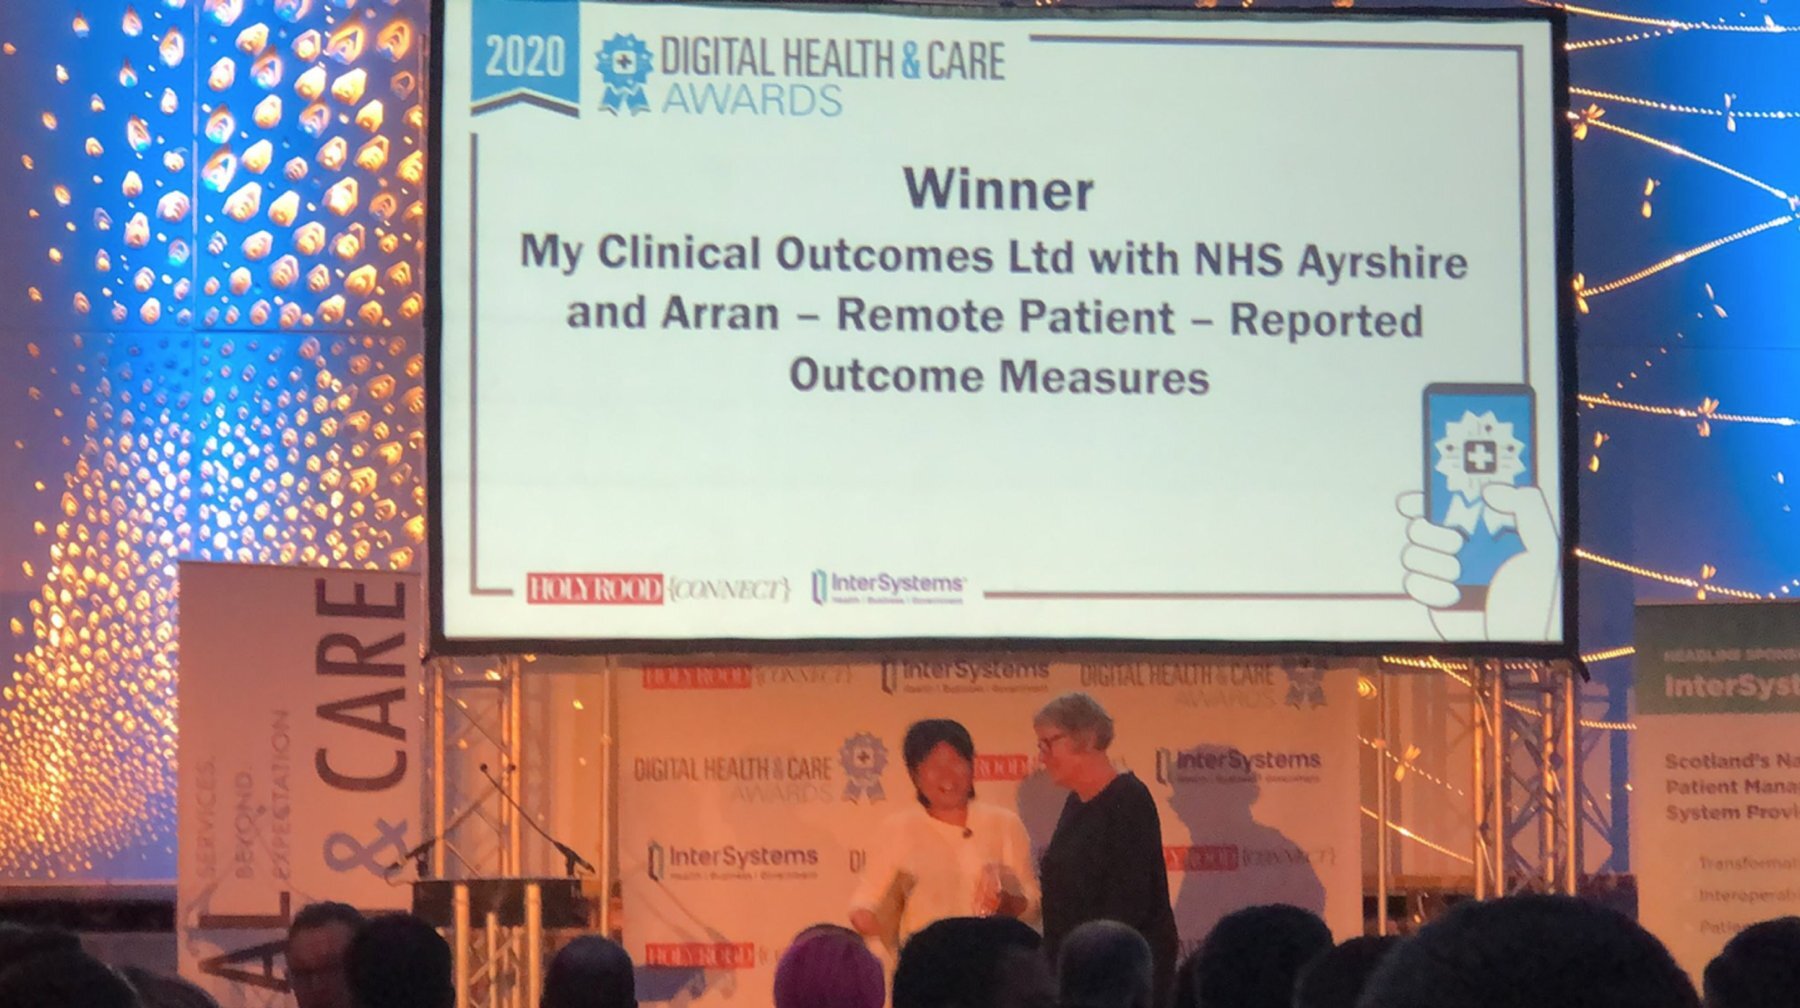 Recognised in the Industry Collaboration Award category at the Holyrood Digital Health &amp; Care Awards.